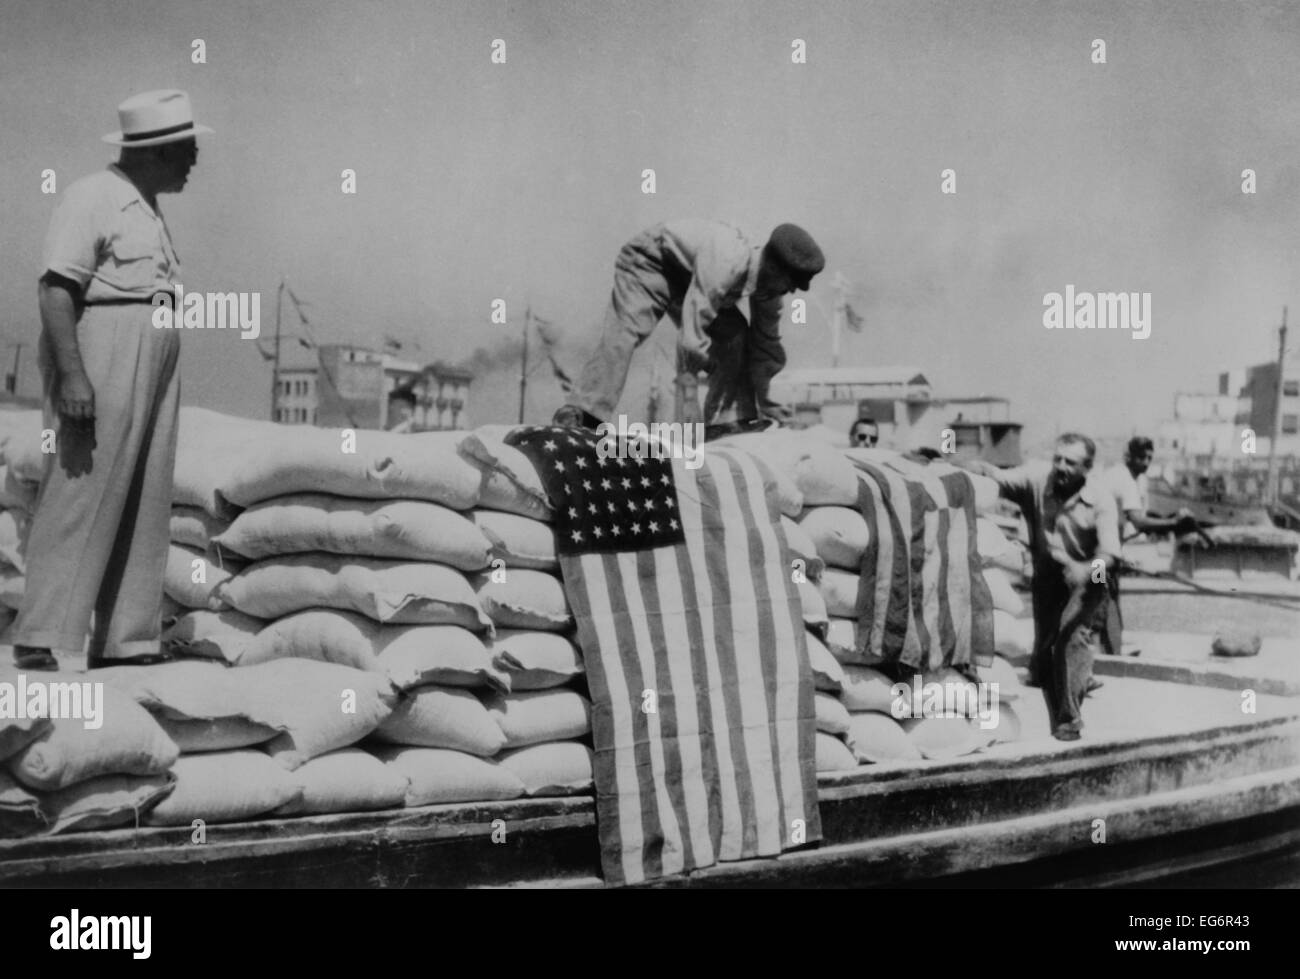 Sacks of flour, the first relief supplies from the United States, being unloaded in the port of Piraeus. American and Greek Stock Photo